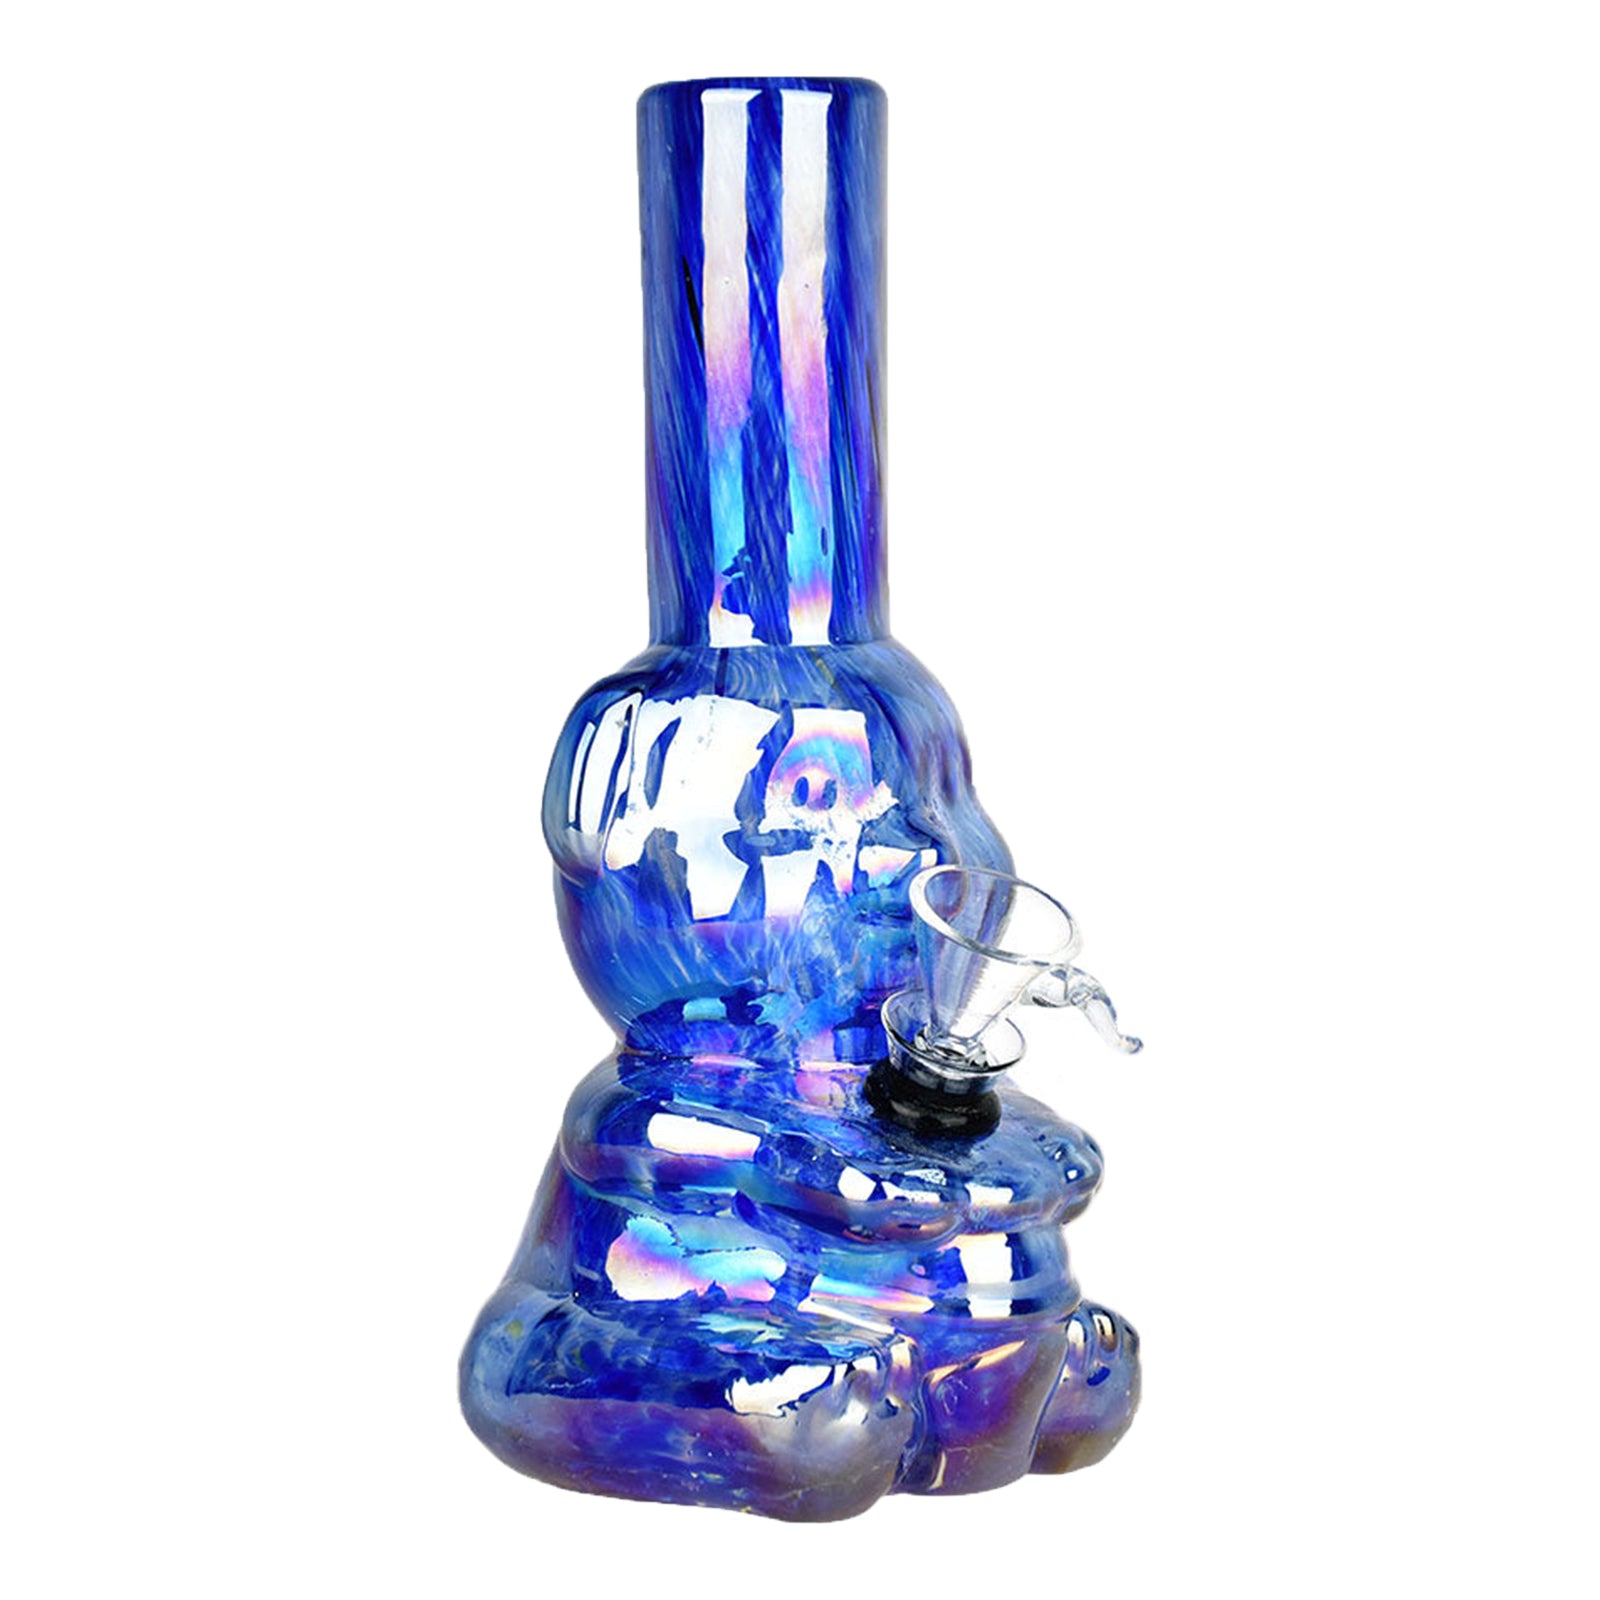 Bear-y Shiny Electroplated Soft Glass Water Pipe - INHALCO